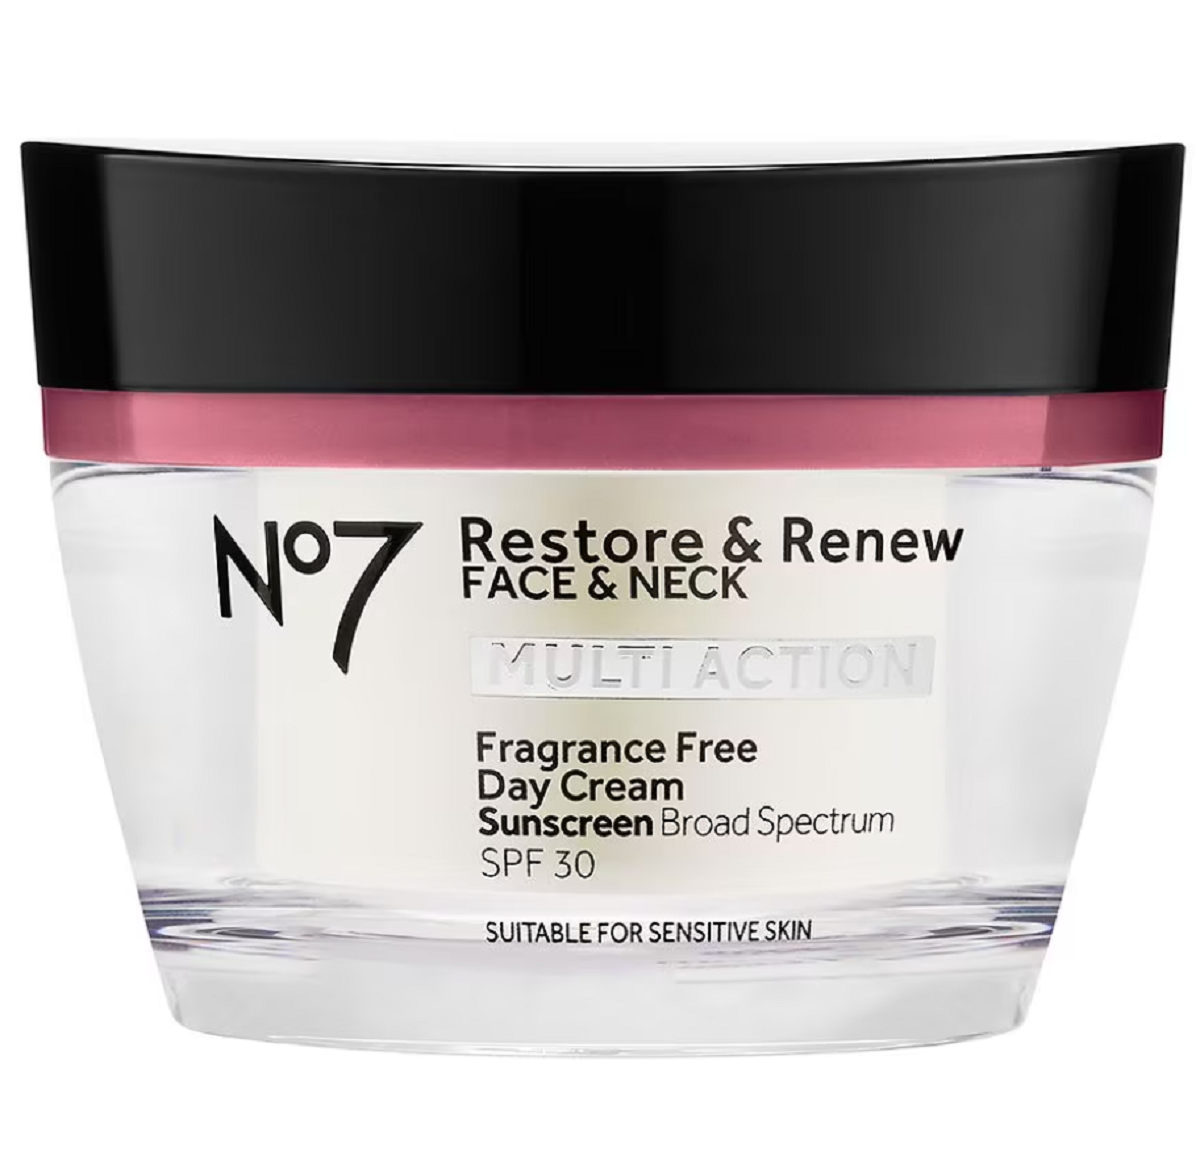 No7 Restore & Renew Face & Neck Mulit Action Fragrance Free Day Cream SPF 30 Fragrance Free, No7 Printable Coupon